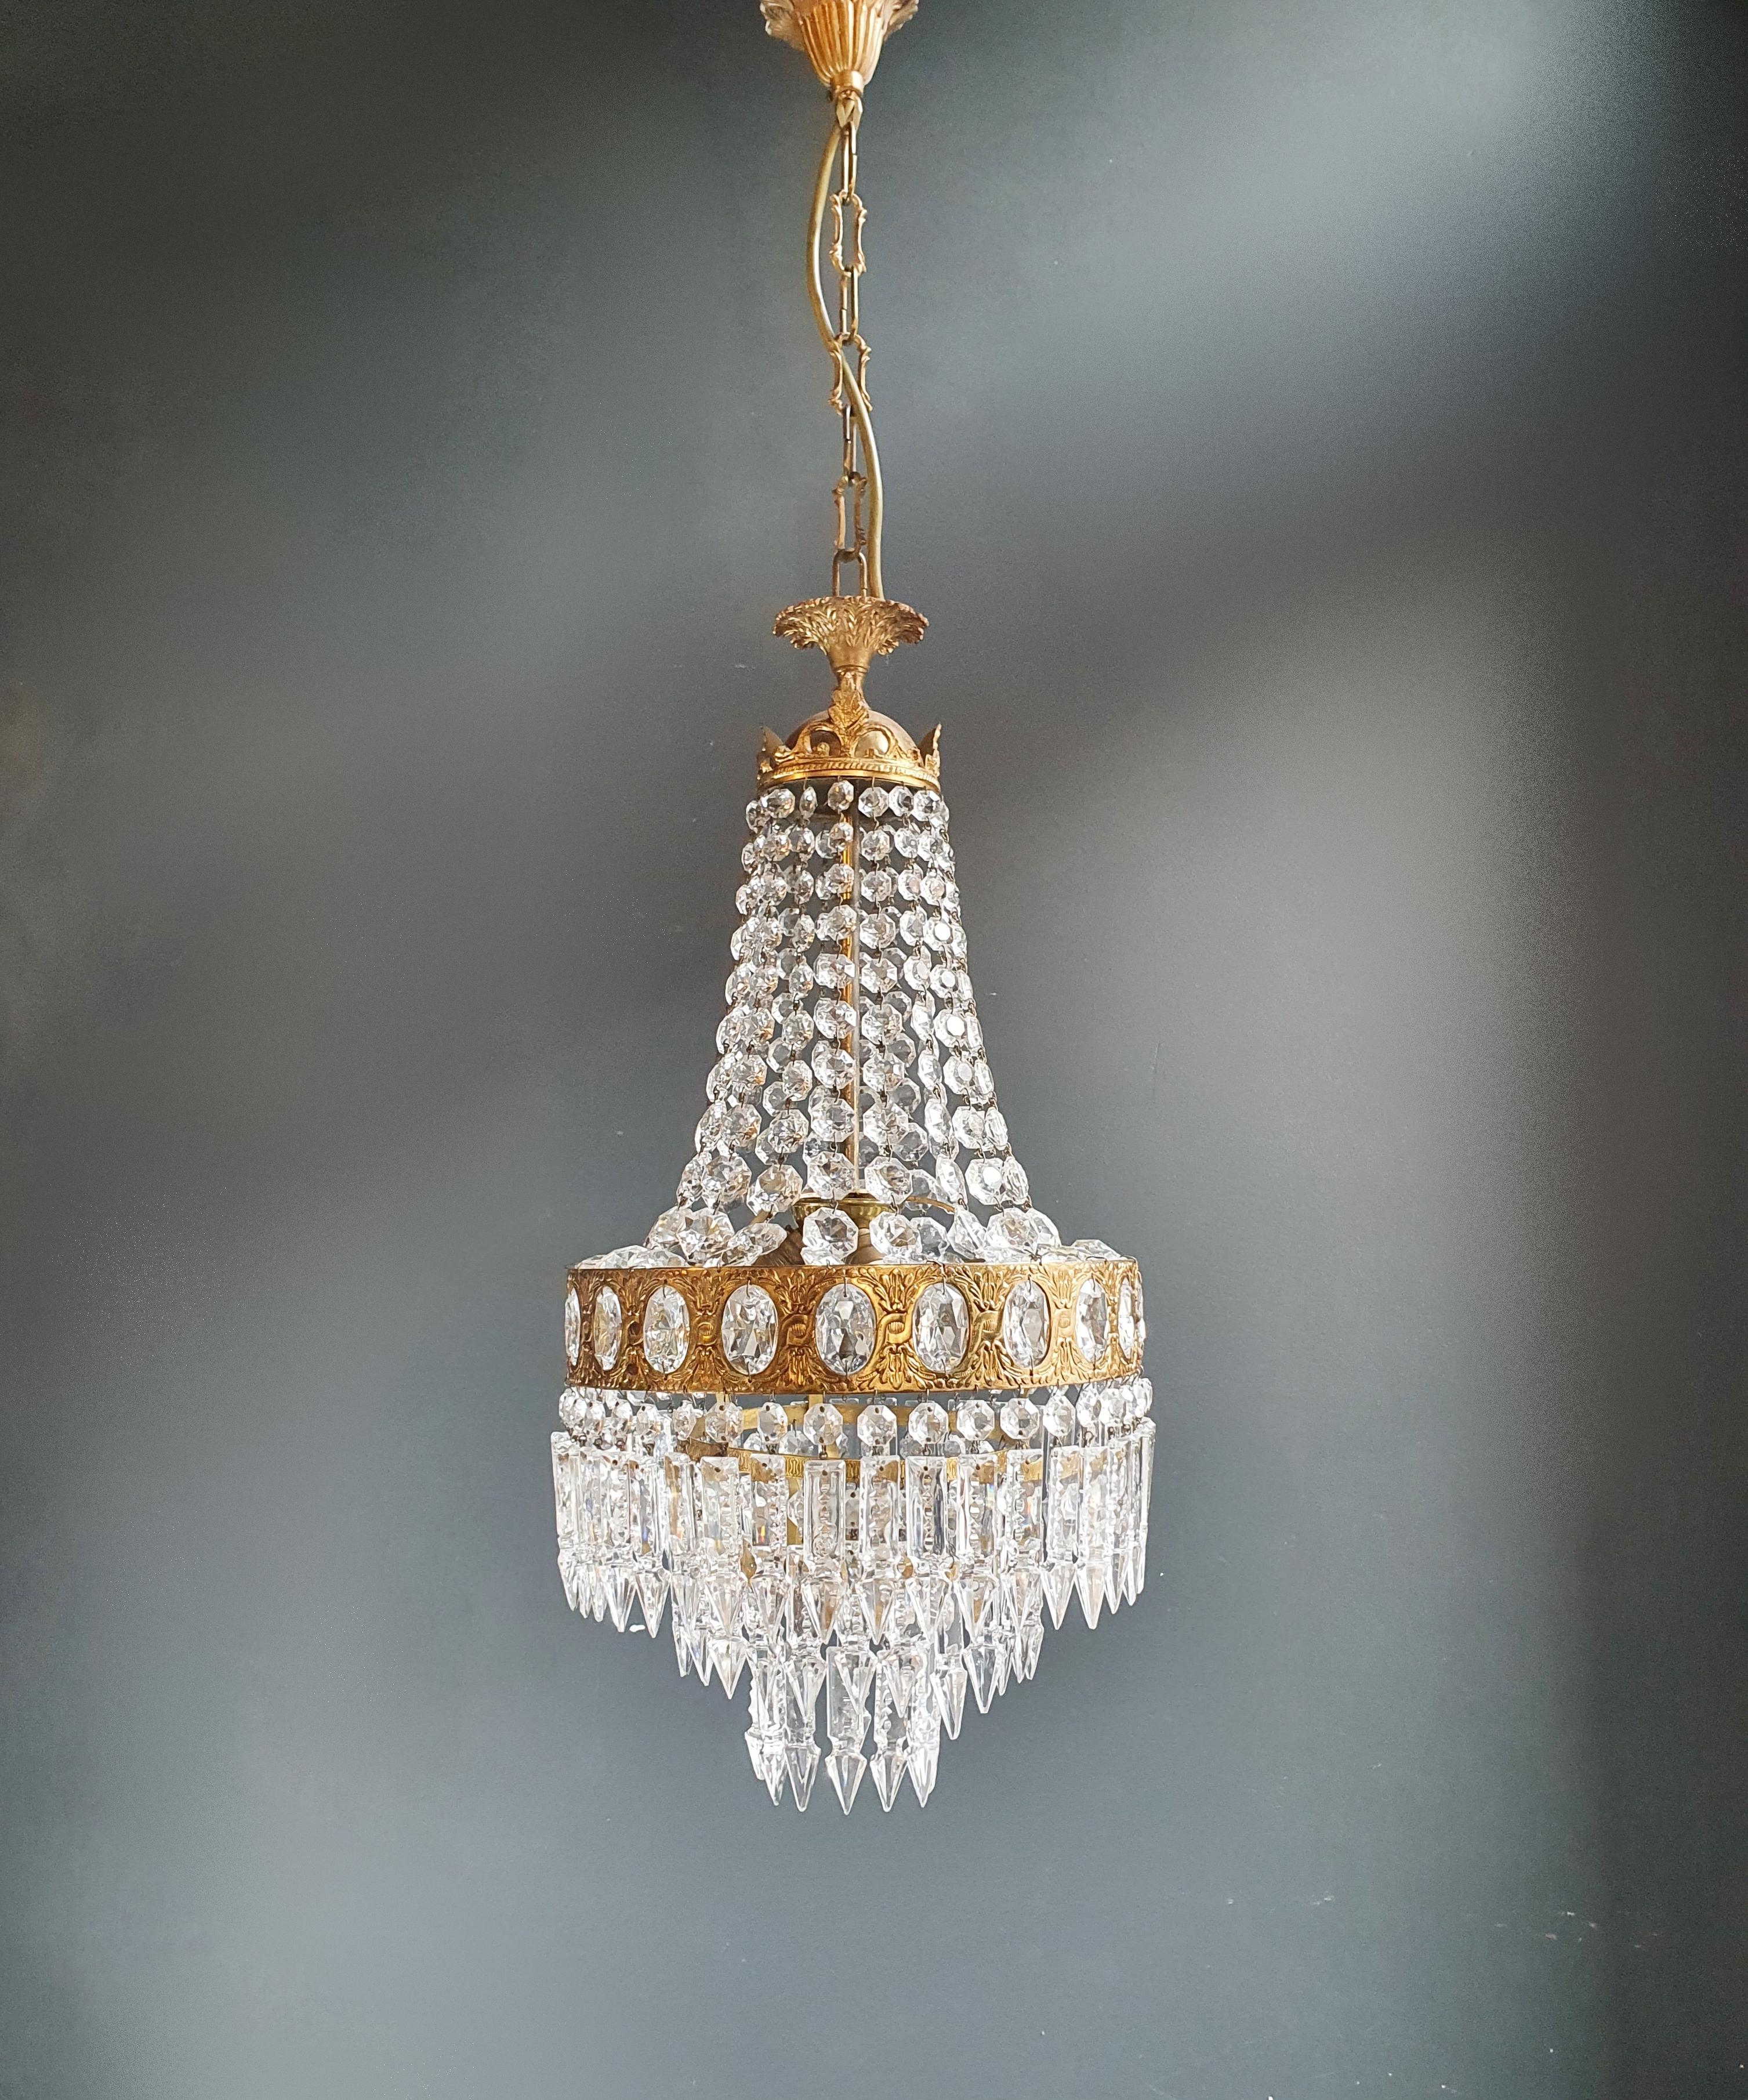 Cabling and sockets completely renewed. Crystal hand knotted
Measures: Total height 95 cm, without chain 65 cm, diameter 28 cm, weight (approximately) 7 kg.

Number of lights: 4-light bulb sockets: E14

Fine brass Empire Sac a pearl chandelier